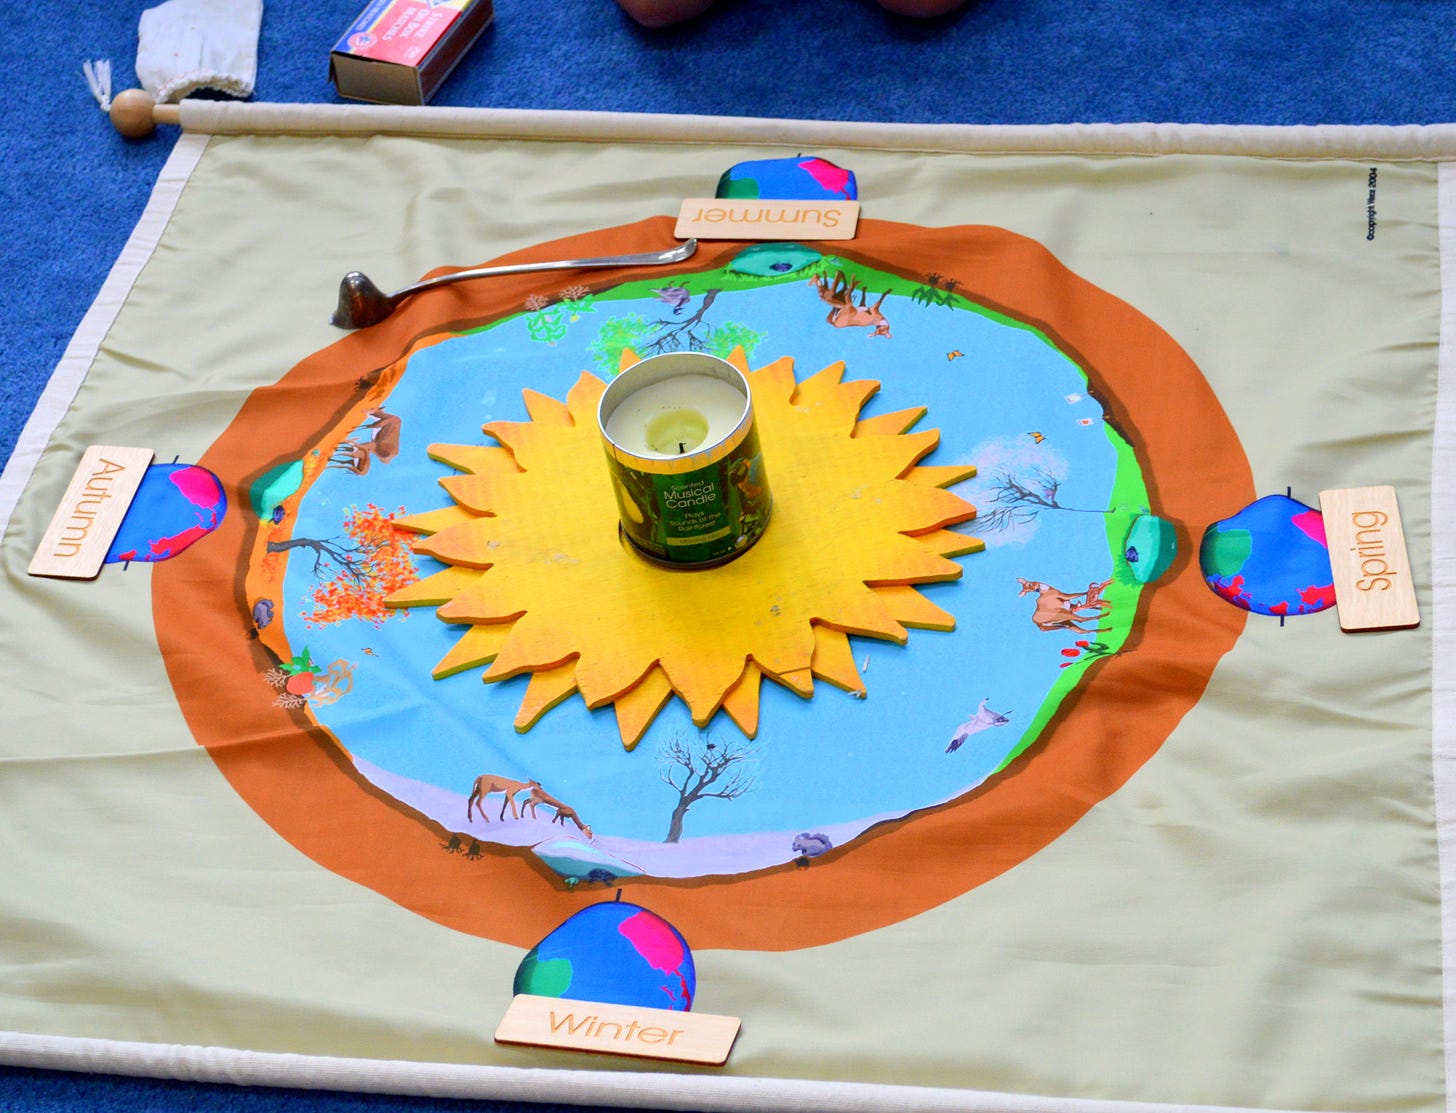 The Montessori Birthday Walk celebration is shown with a candle in the center of a sun and the seasons of the year shown in a circle around it on a light brown background.